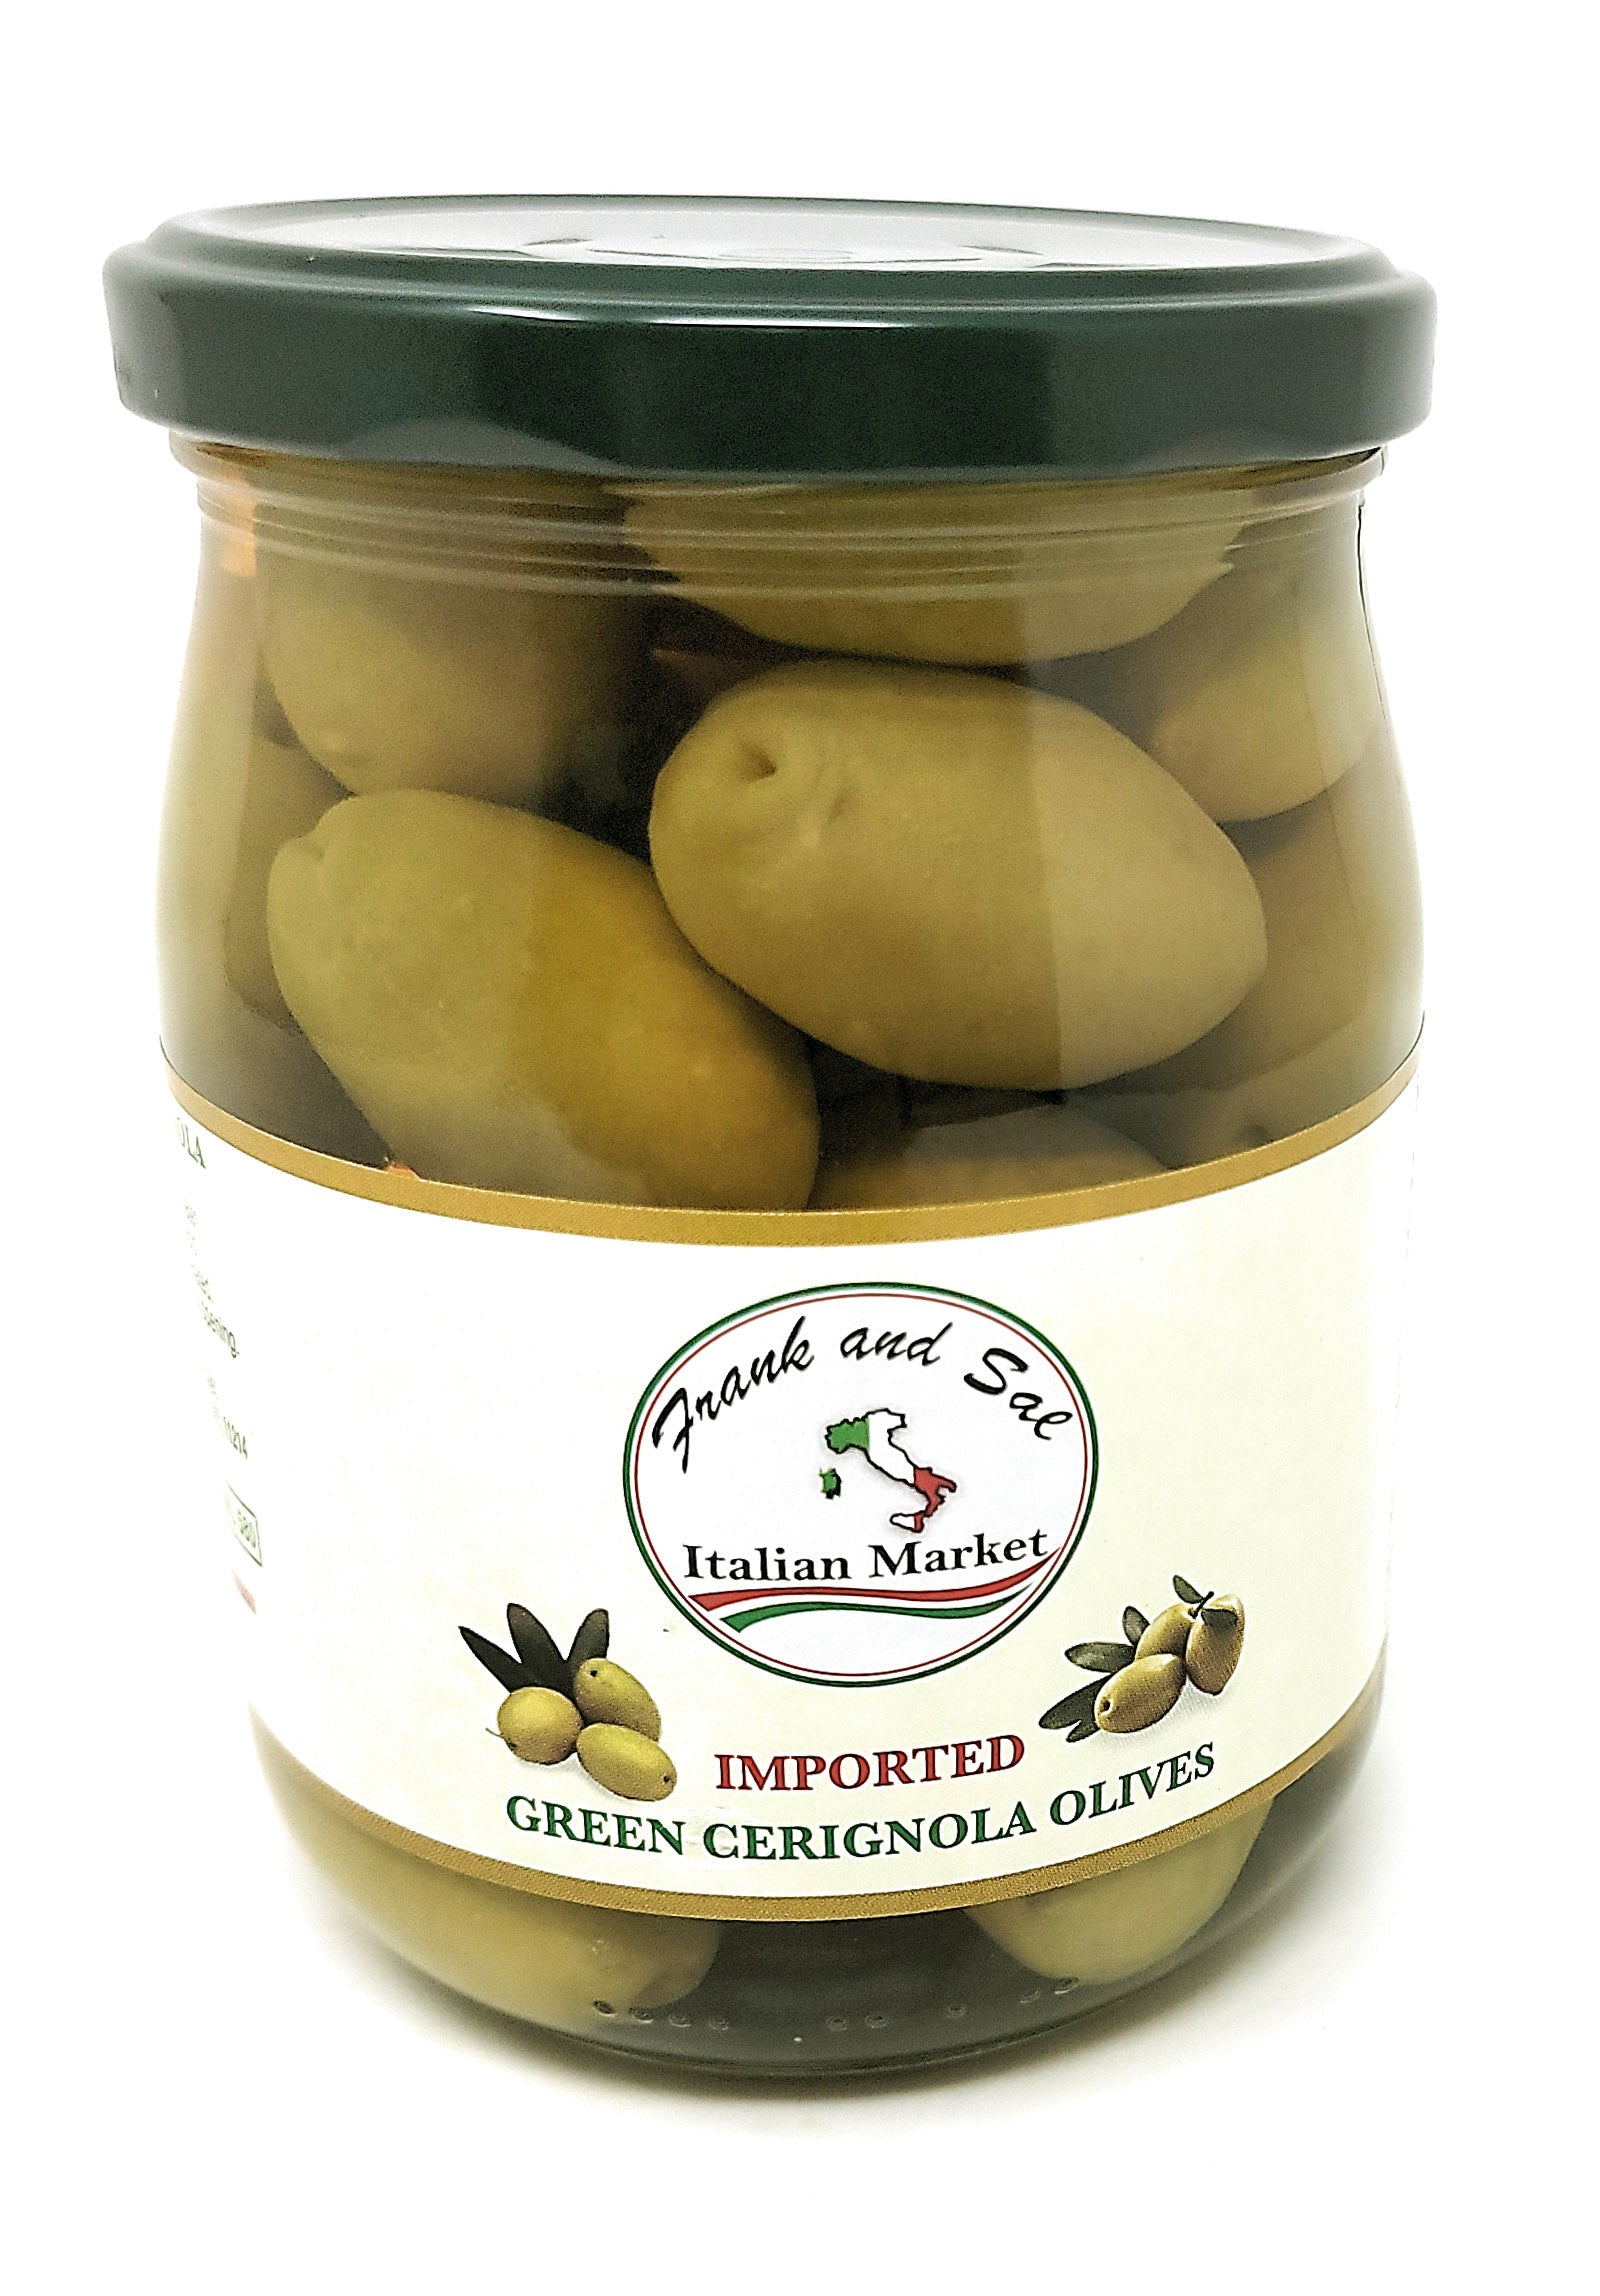 Whole Green Cerignola Olives imported From Italy - 2 Glass Jars 19.4 ounces each